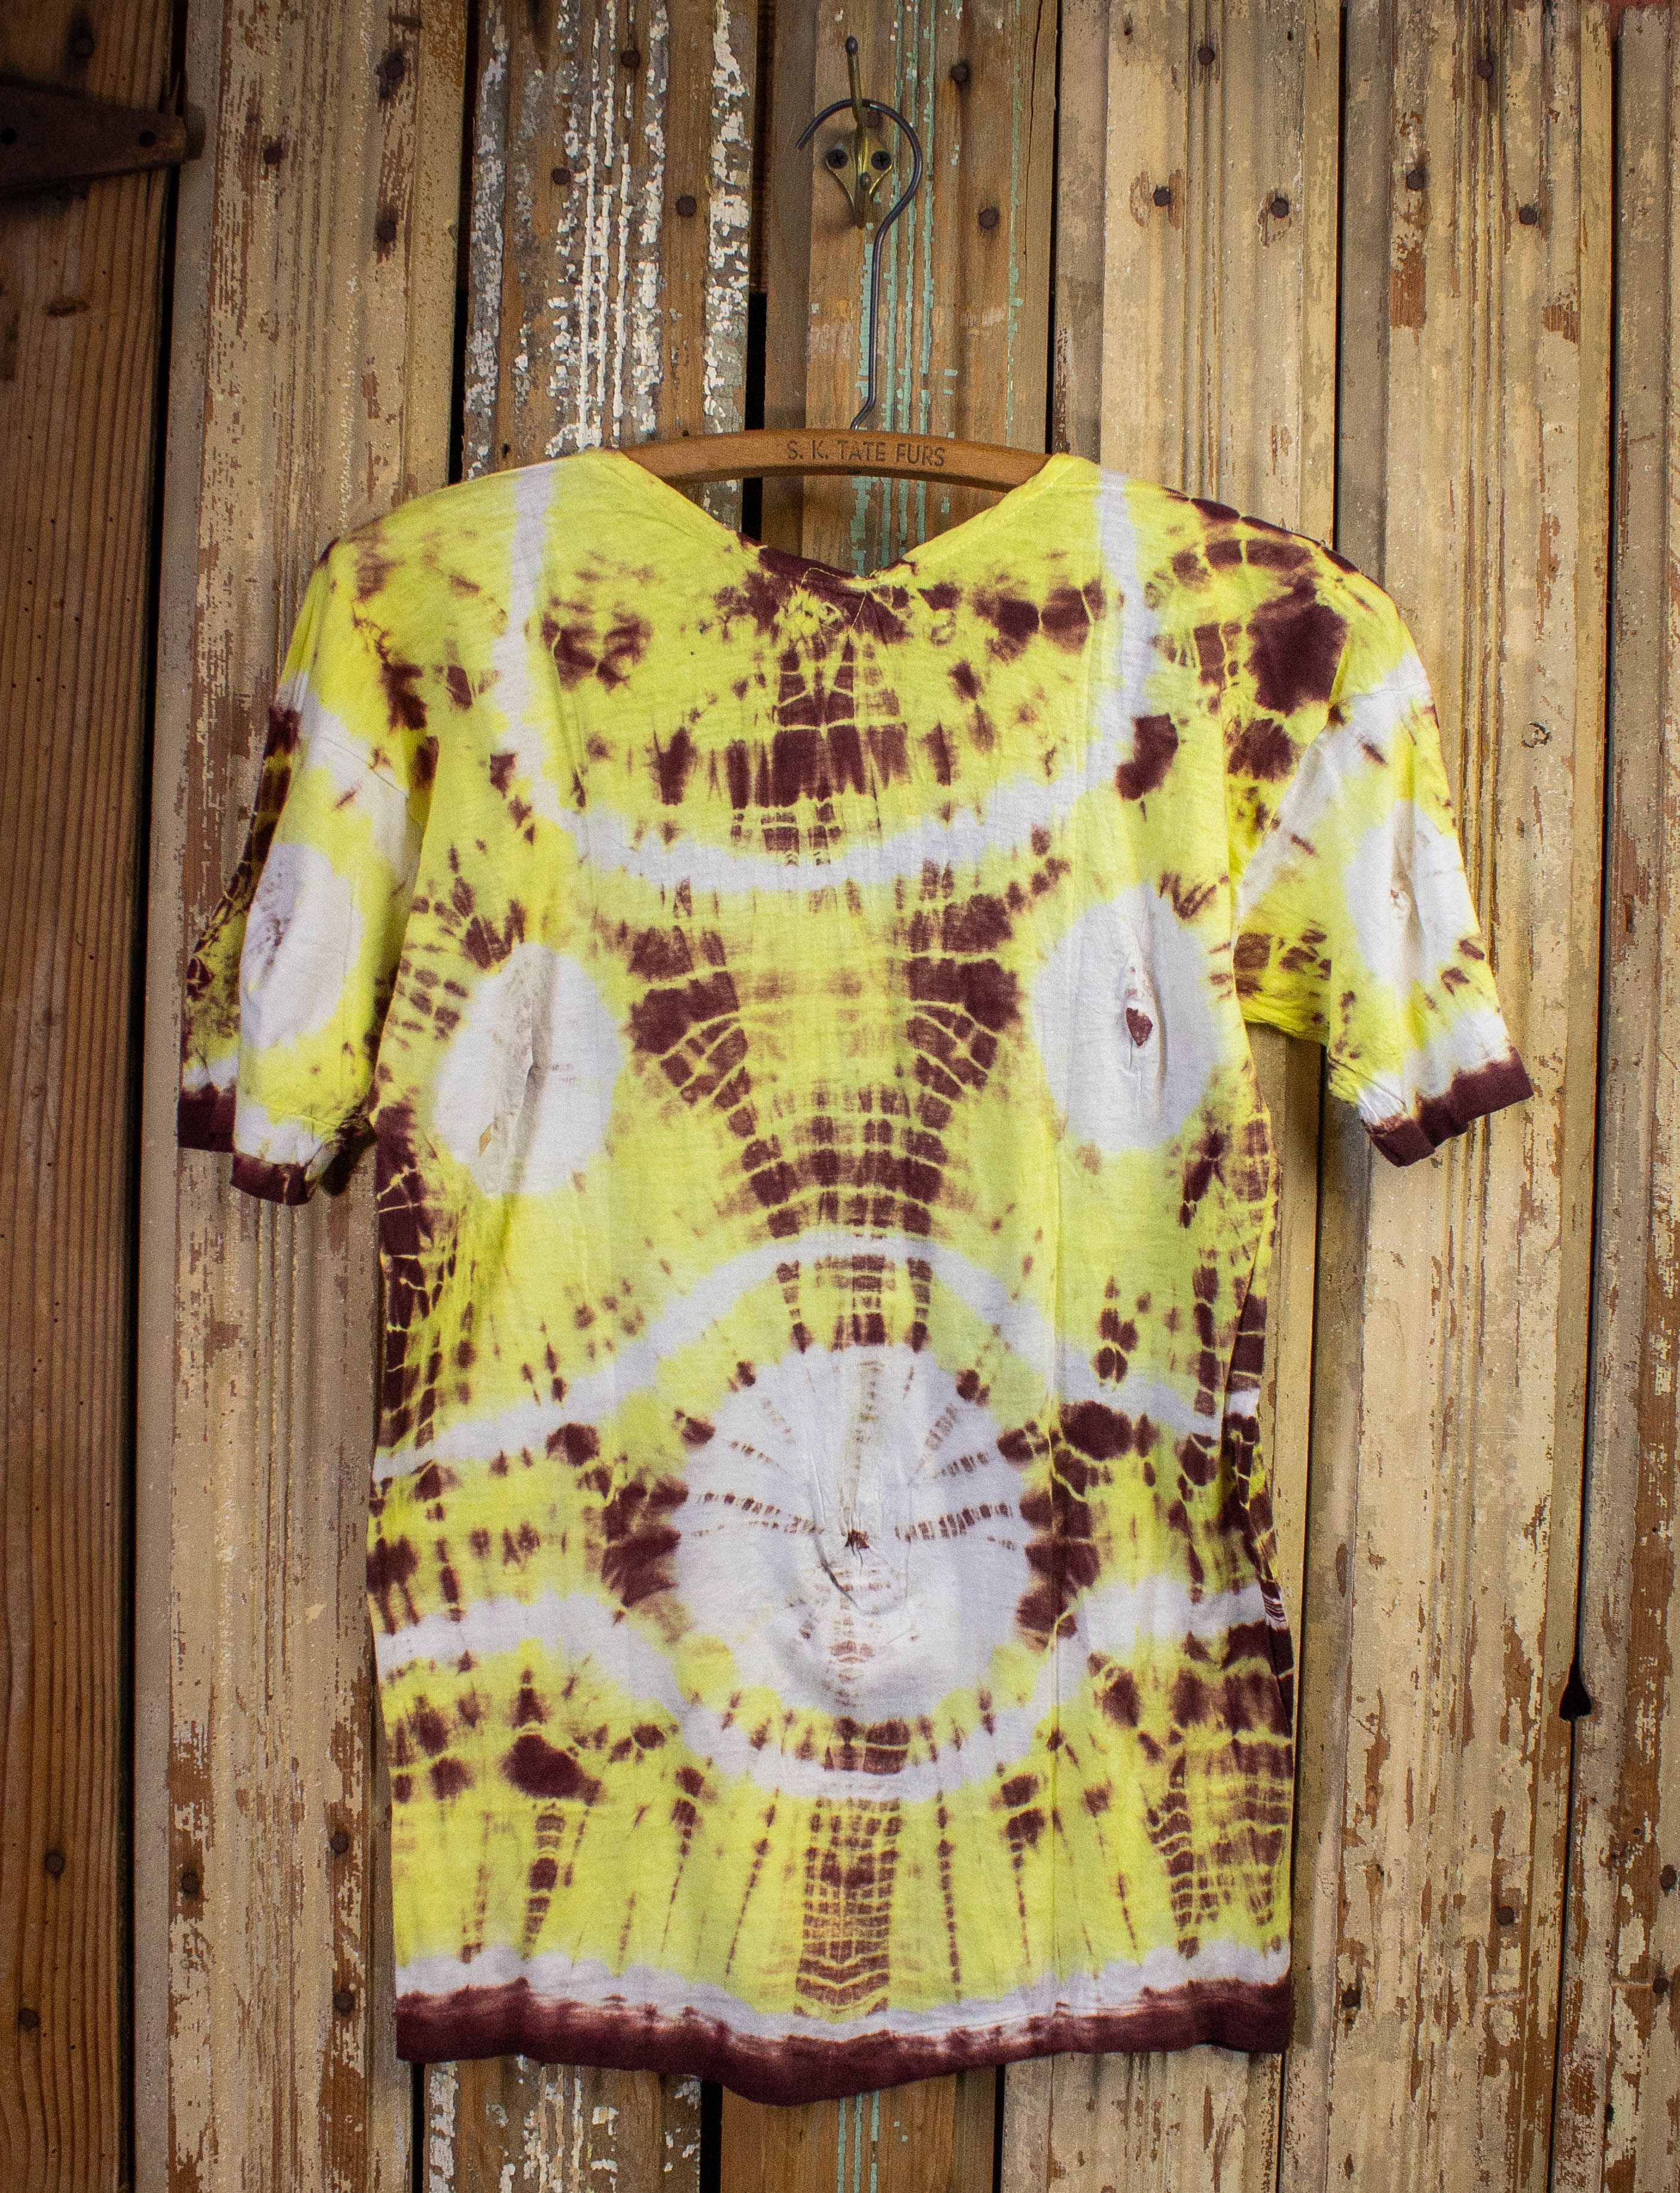 Vintage Vintage Yellow and Brown Tie Dye Shirt 70s Size US S / EU 44-46 / 1 - 2 Preview